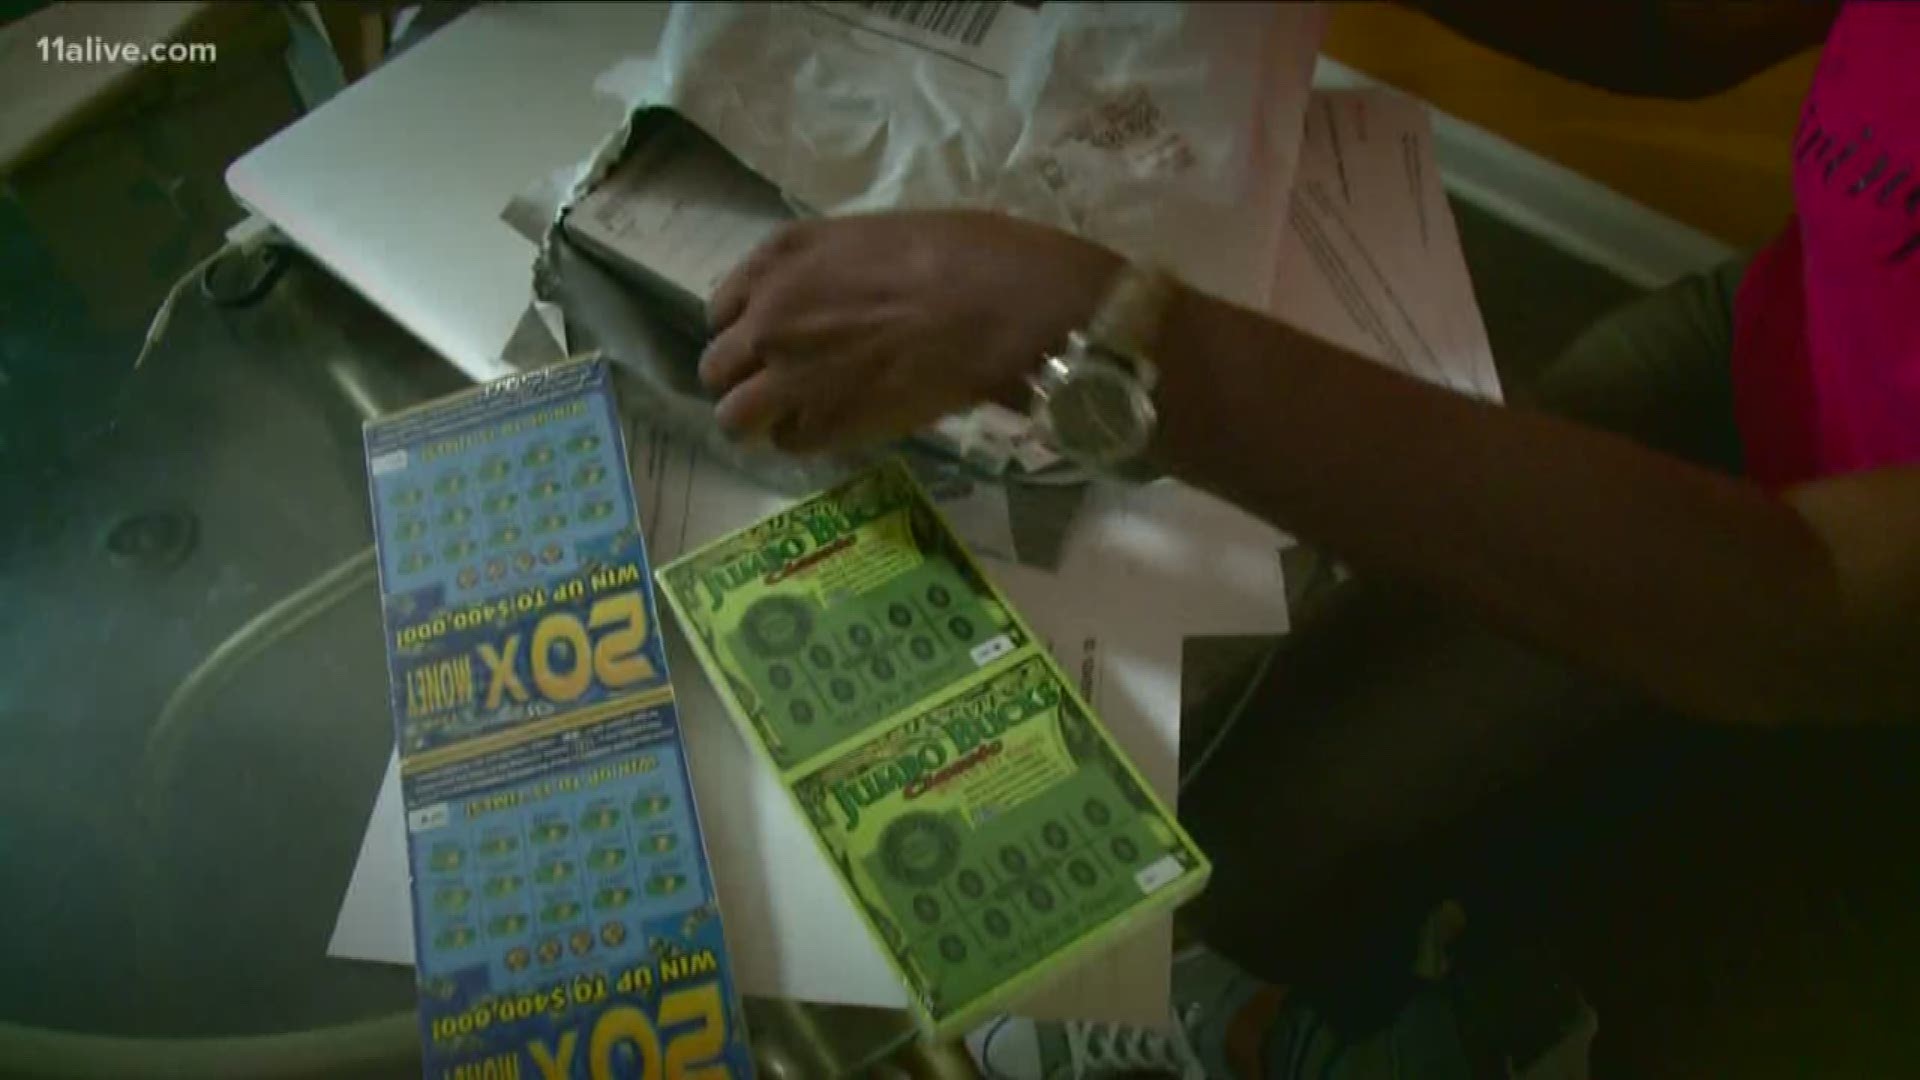 The Marietta woman wants the Georgia Lottery to fix the situation.